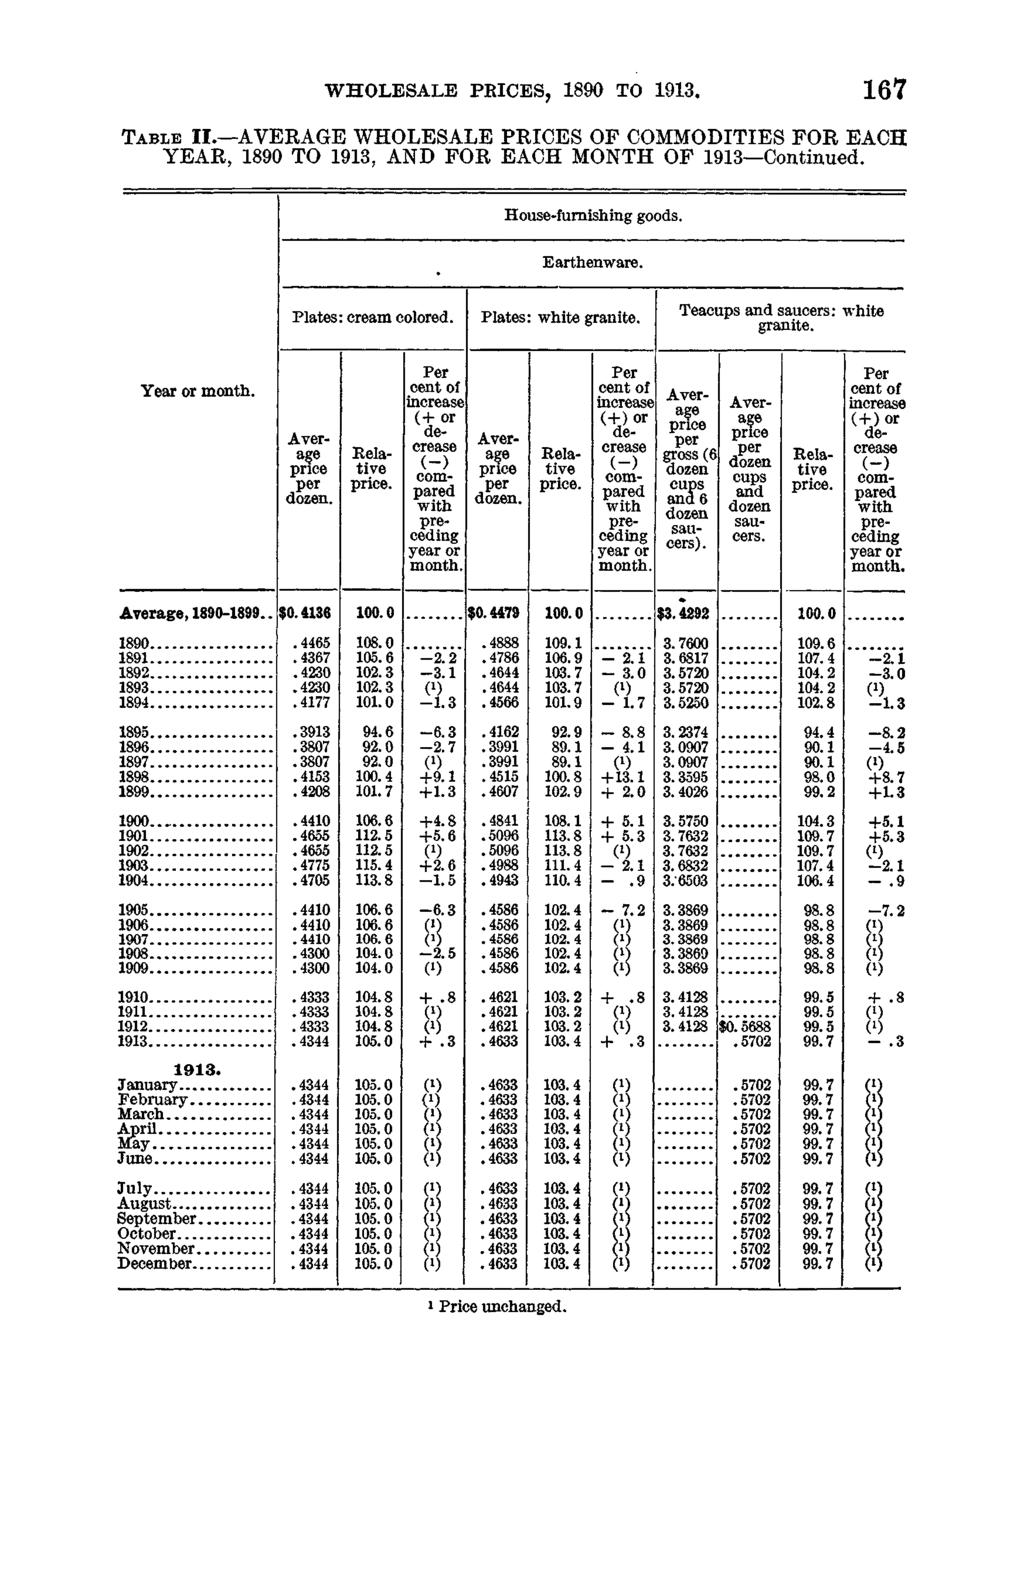 WHOLESALE PRICES, 1890 TO 1913. 1 6 7 T a b l e I I. AVERAGE WHOLESALE PRICES OF COMMODITIES FOR EACH YEAR, 1890 TO 1913, AND FOR EACH MONTH OF 1913 Continued. House-furnishing goods. Earthenware.